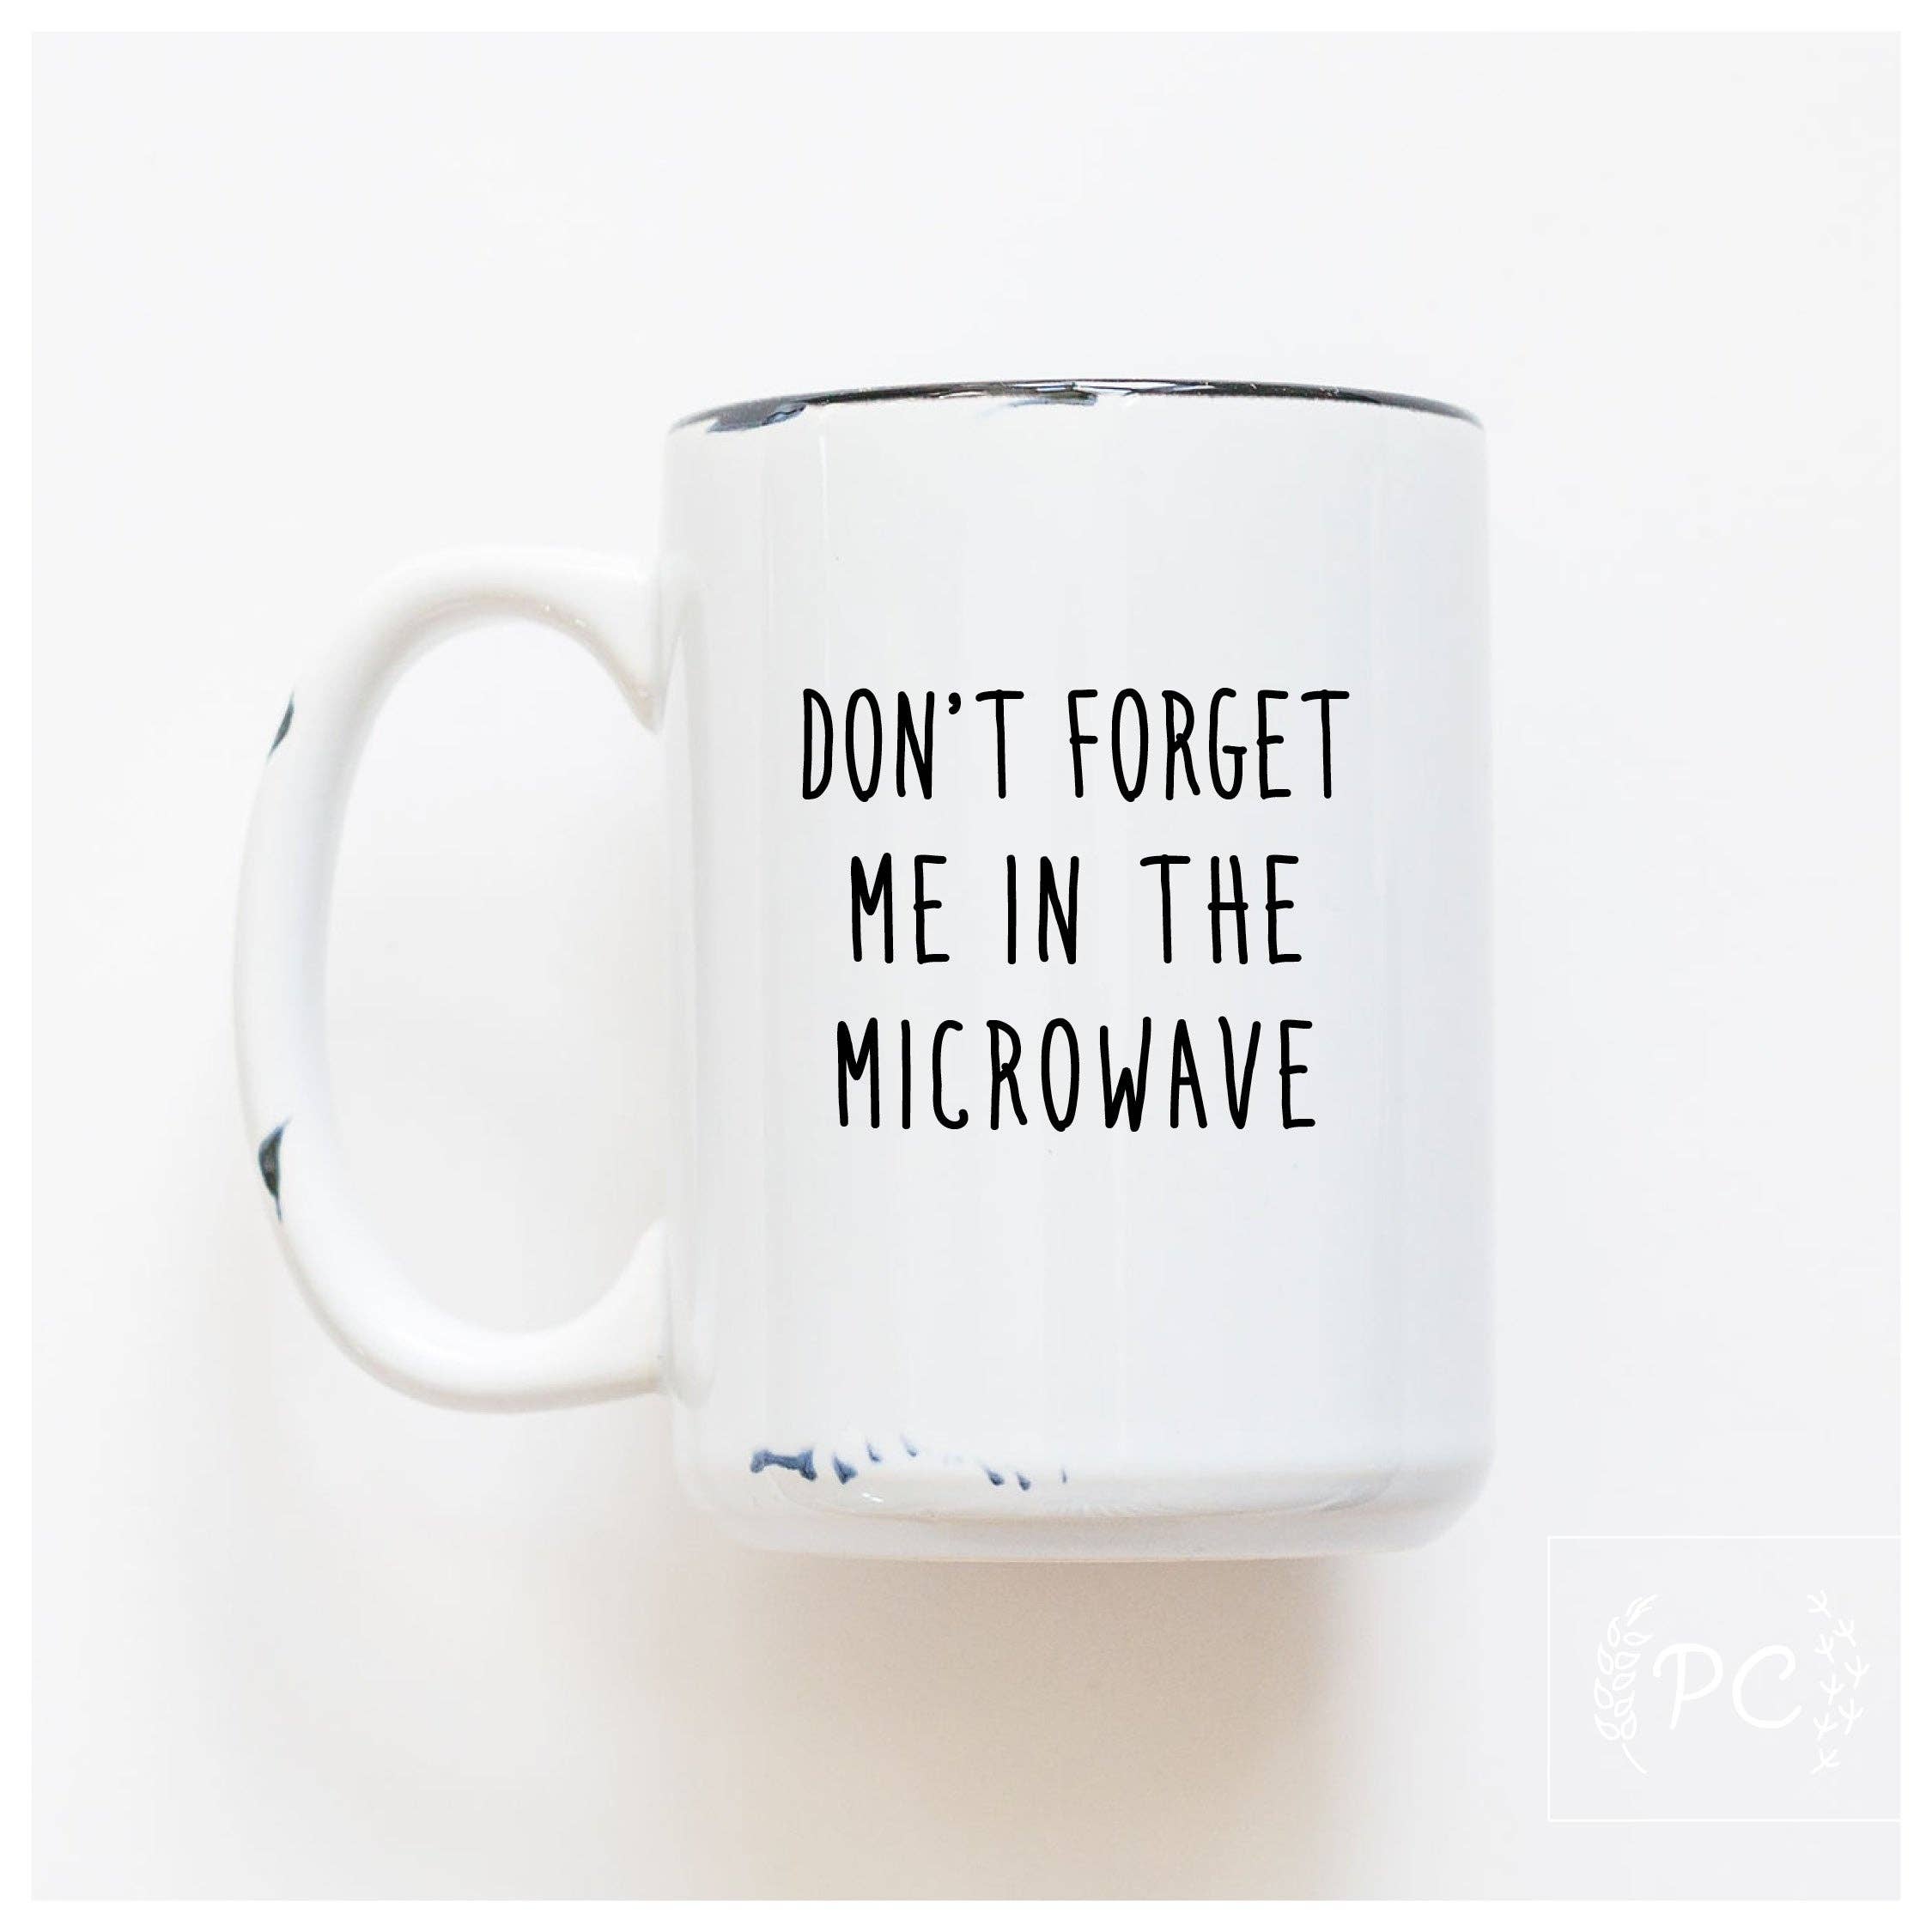 White mug with text "Don't Forget Me in The Microwave"